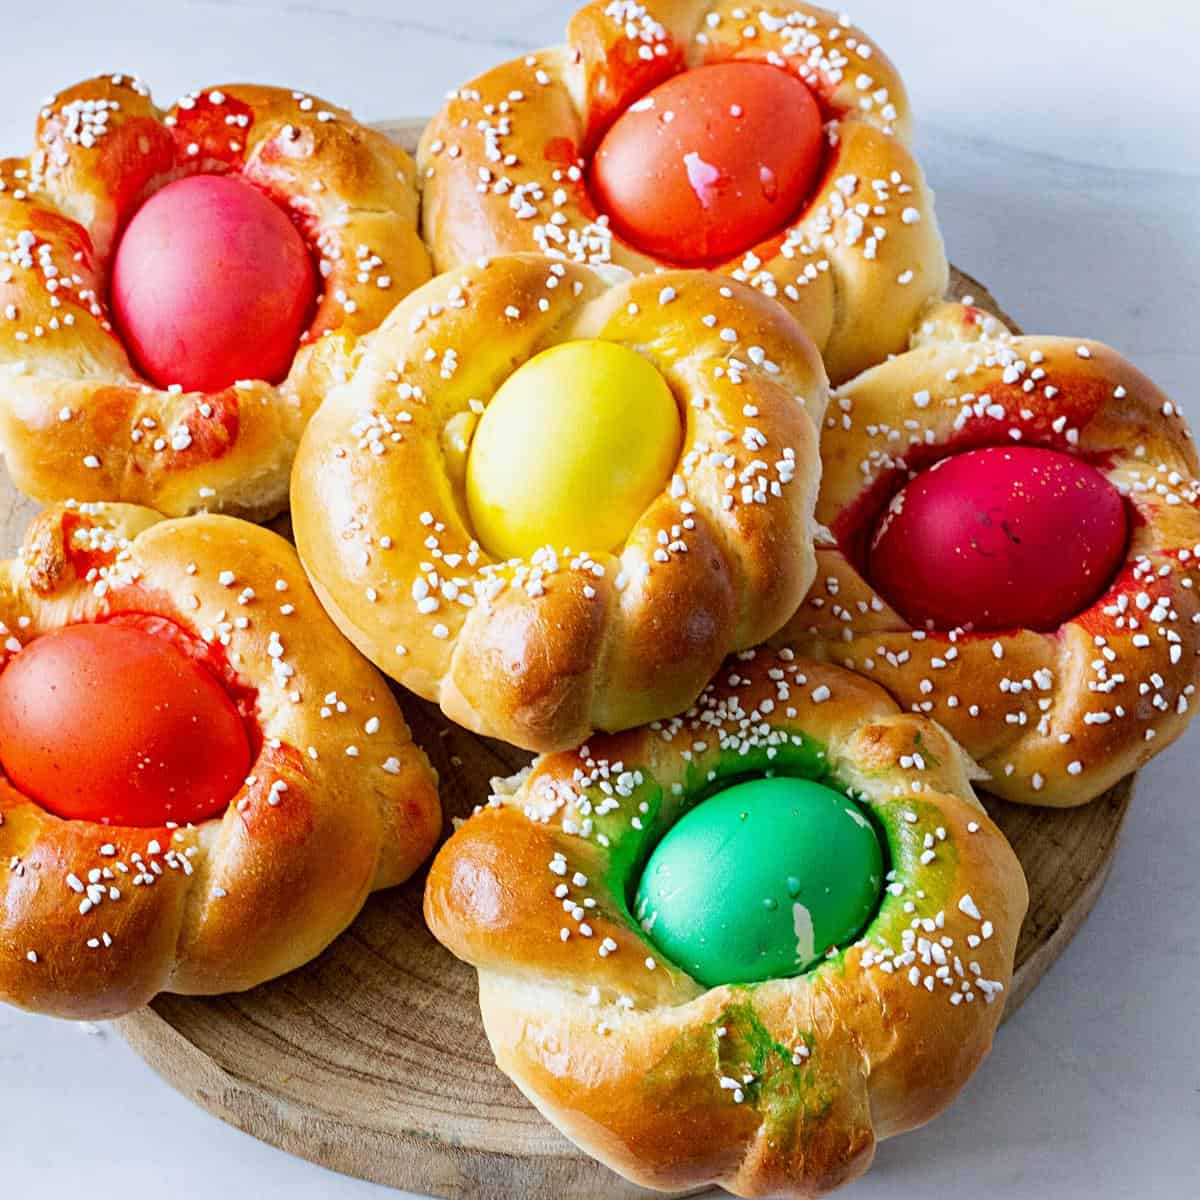 Italian Bread with Easter Egggs on the table.